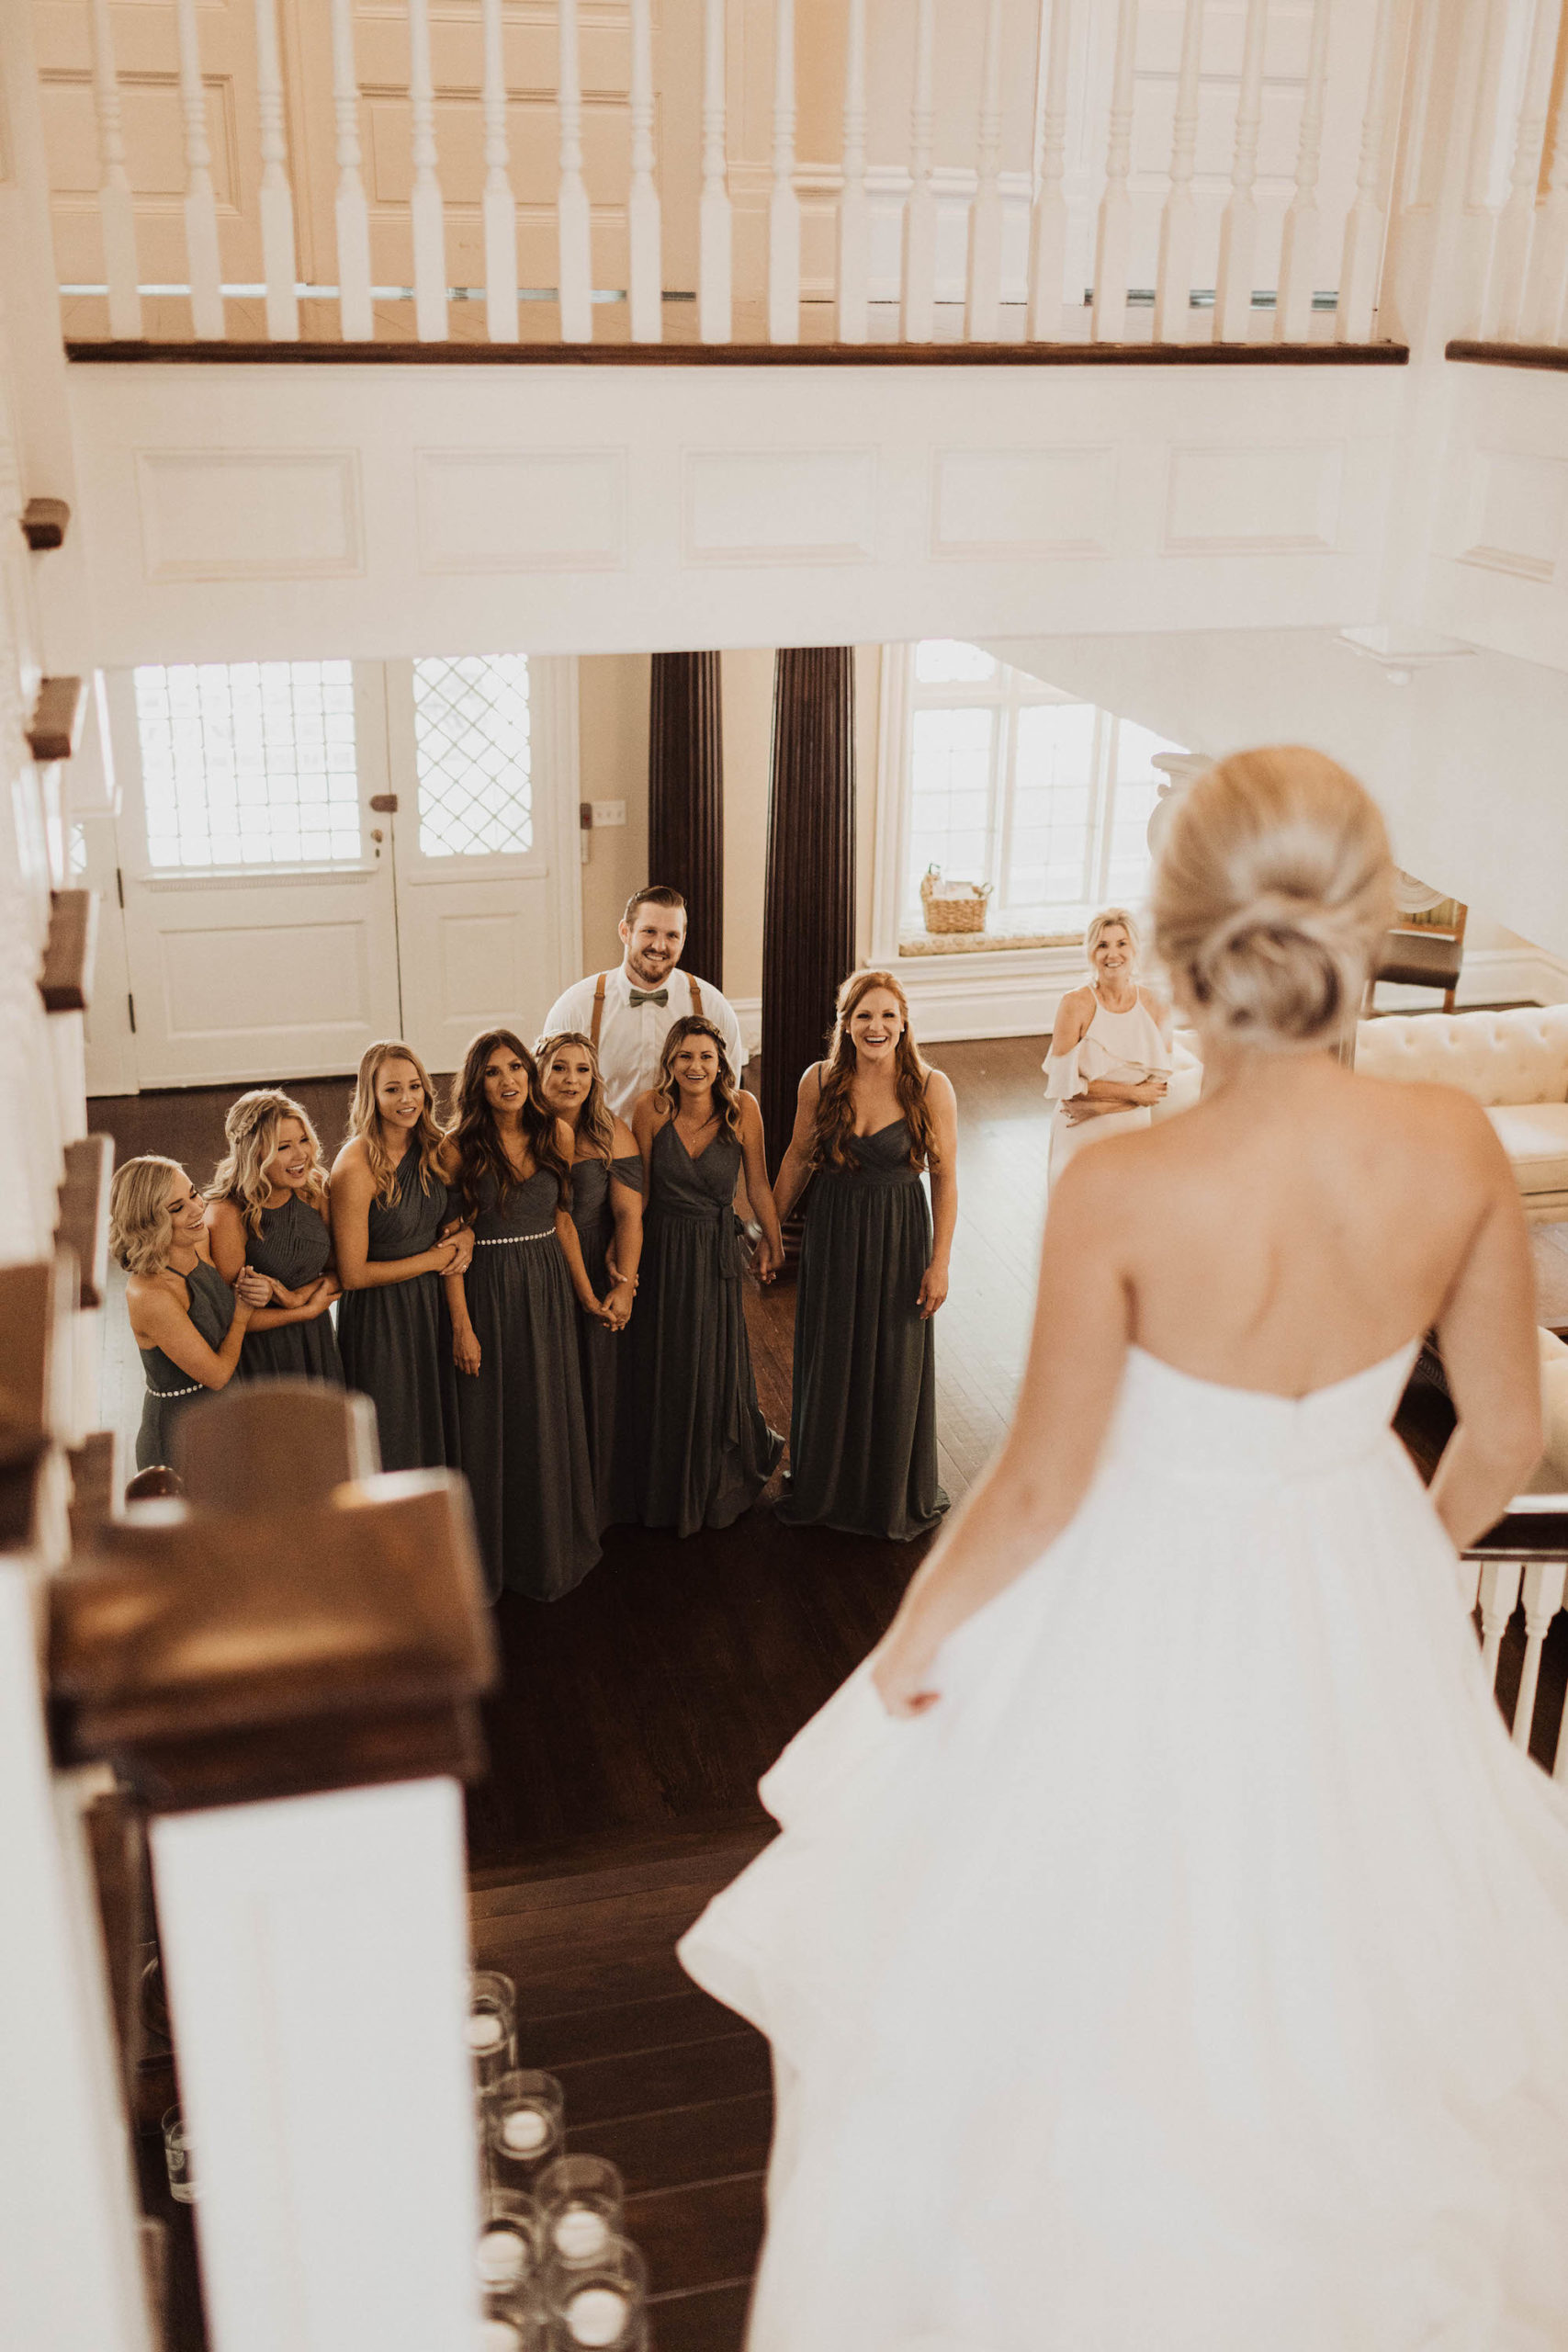 Tampa Bay Bridal Party First Look Wedding Portrait with Bride, Bridesmaids Wearing Mix and Match Green Dresses